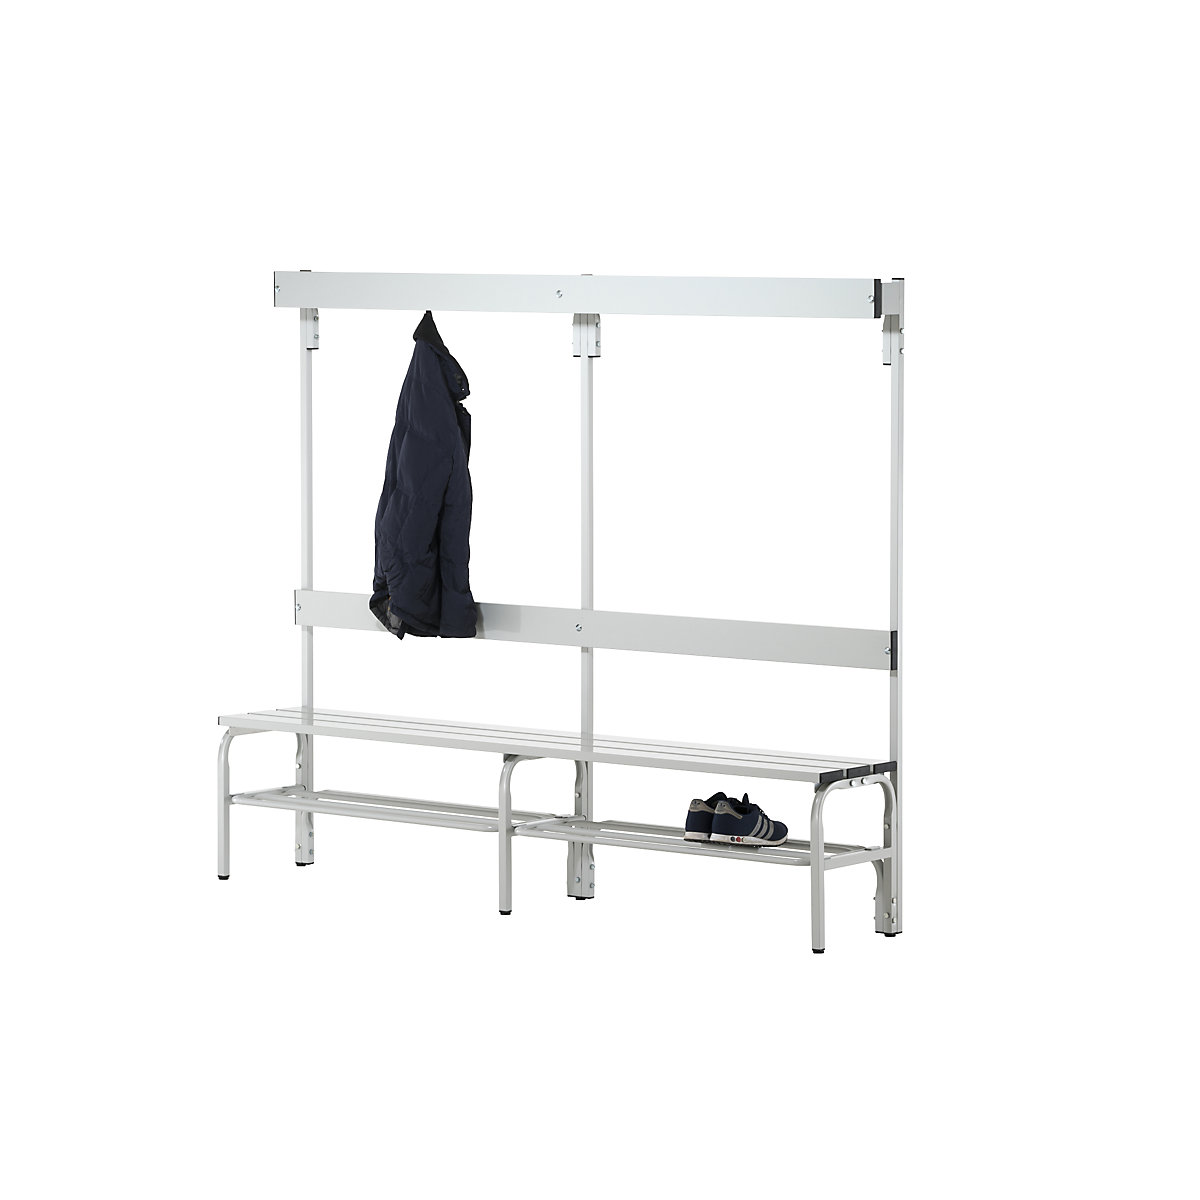 Sypro – Changing room bench made of stainless steel (Product illustration 12)